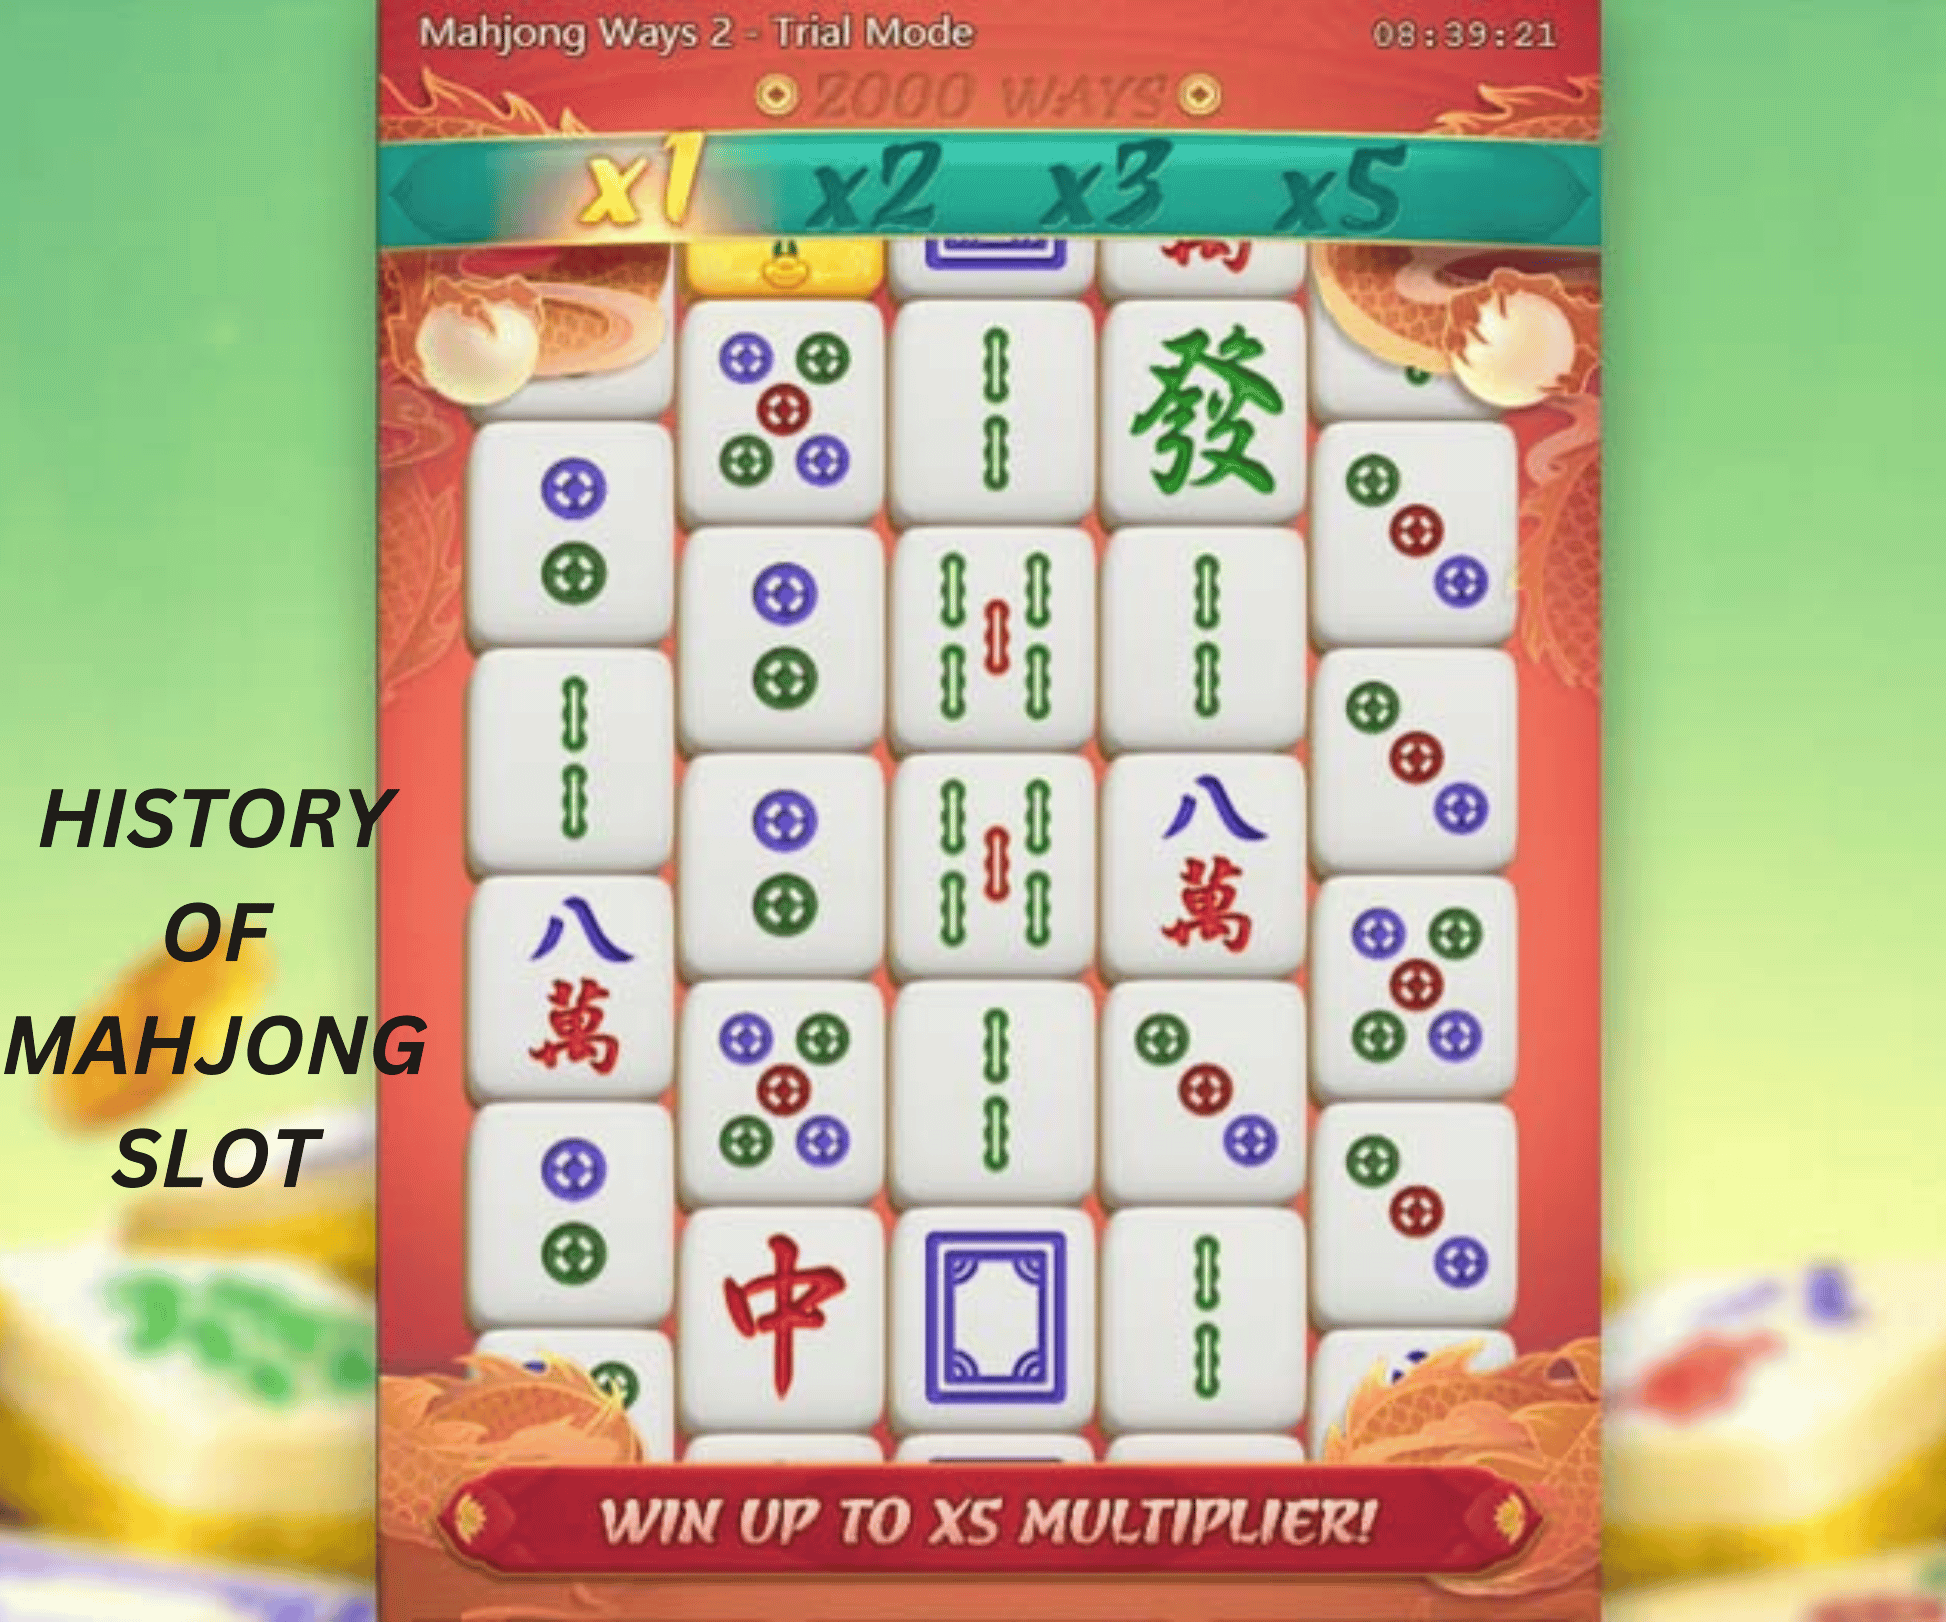 Classic Chinese Mahjong now has an online version of Mahjong slot